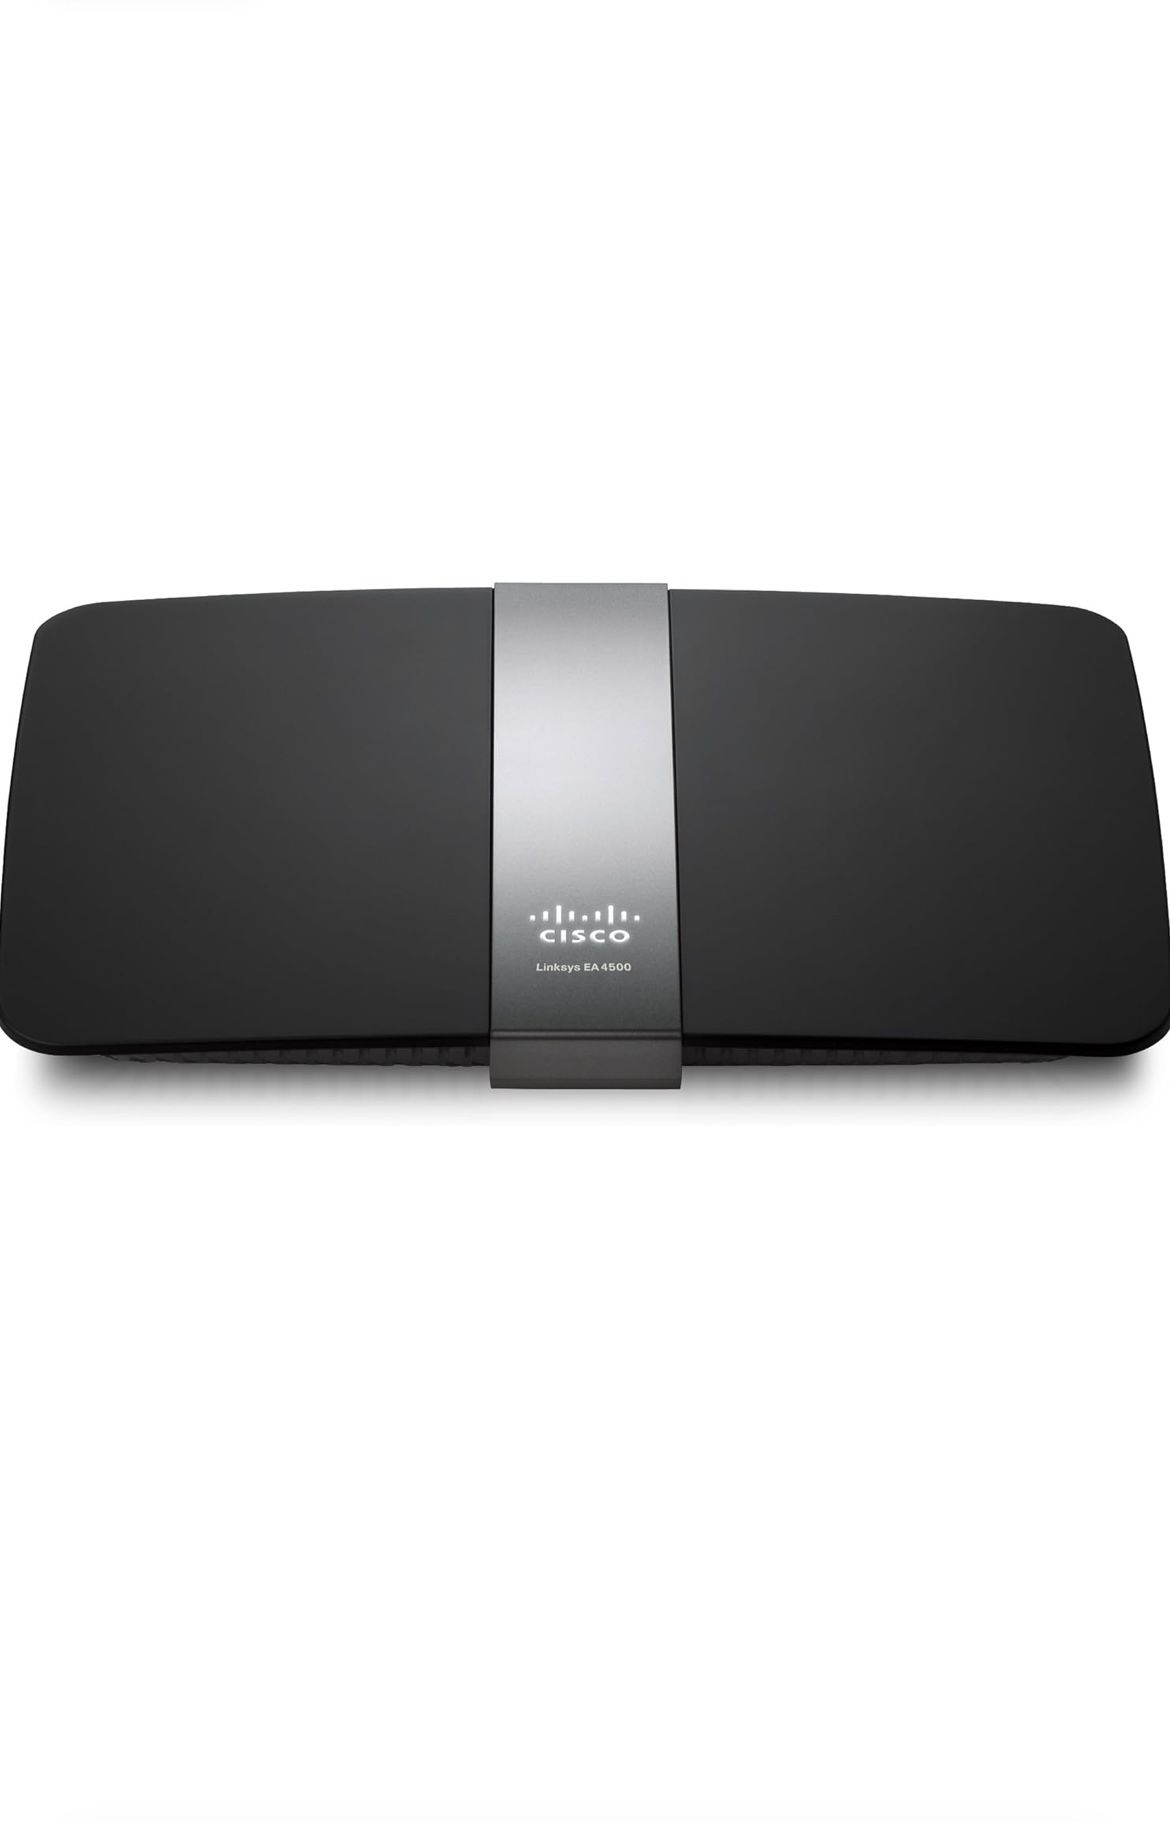 Linksys N900 Wi-Fi Wireless Dual-Band+ Router